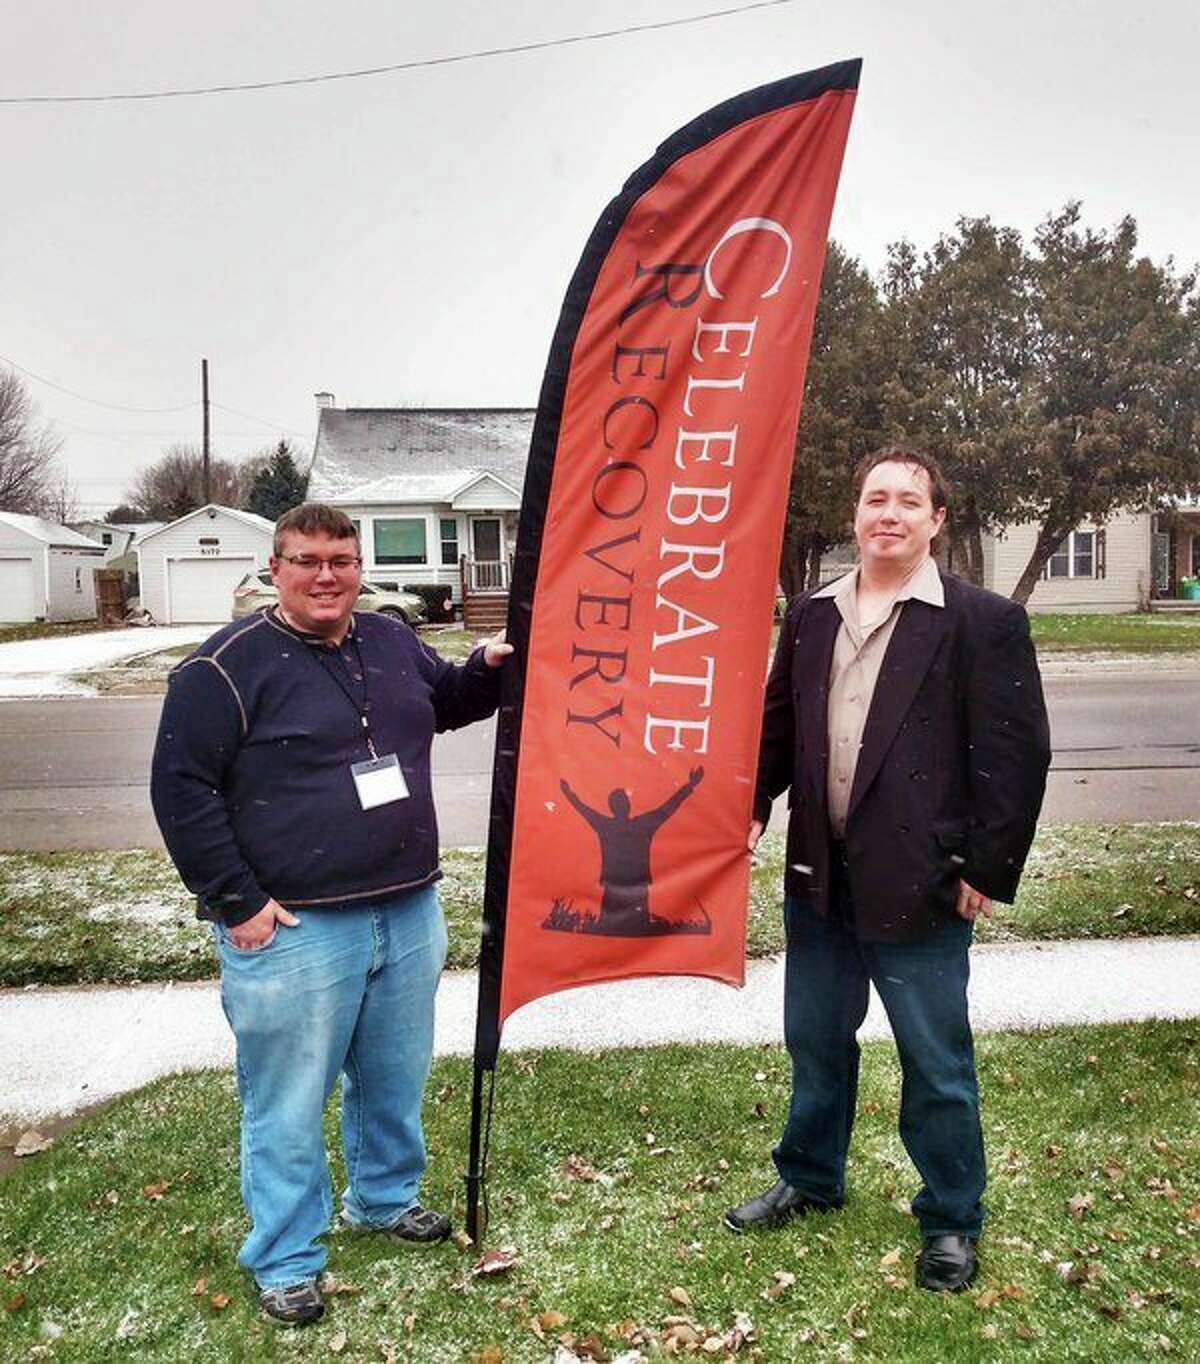 Pastor Ean Green, left, stands by the Celebrate Recovery banner with ministry leader Dave Ross, right. (Sara Eisinger/Huron Daily Tribune)